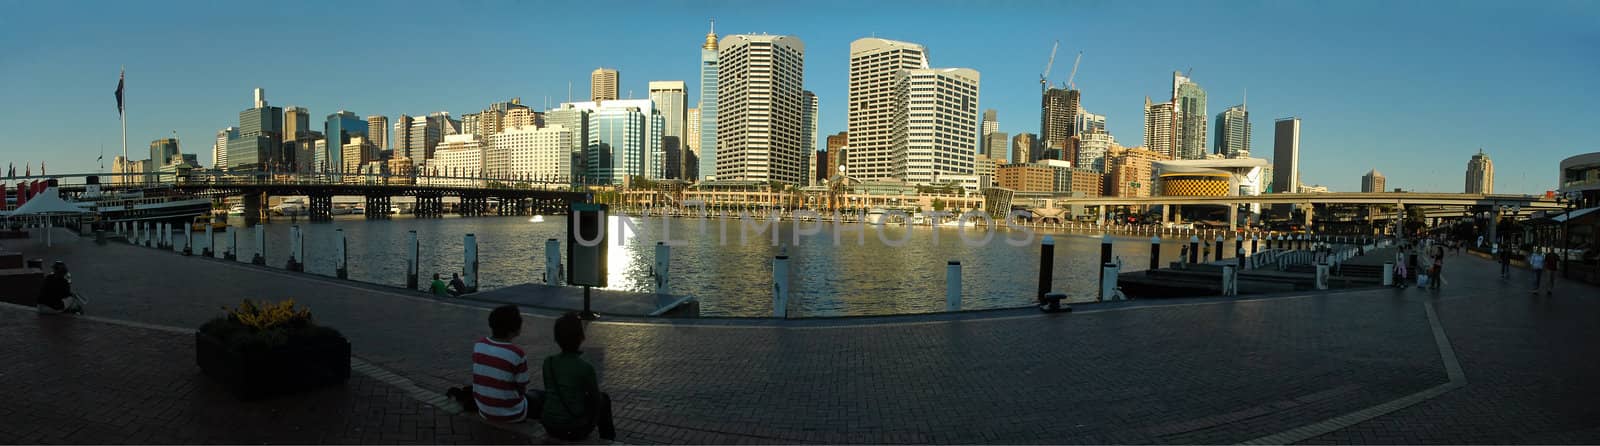 Darling Harbour panorama photo, an hour before sunset, Sydney, Australia